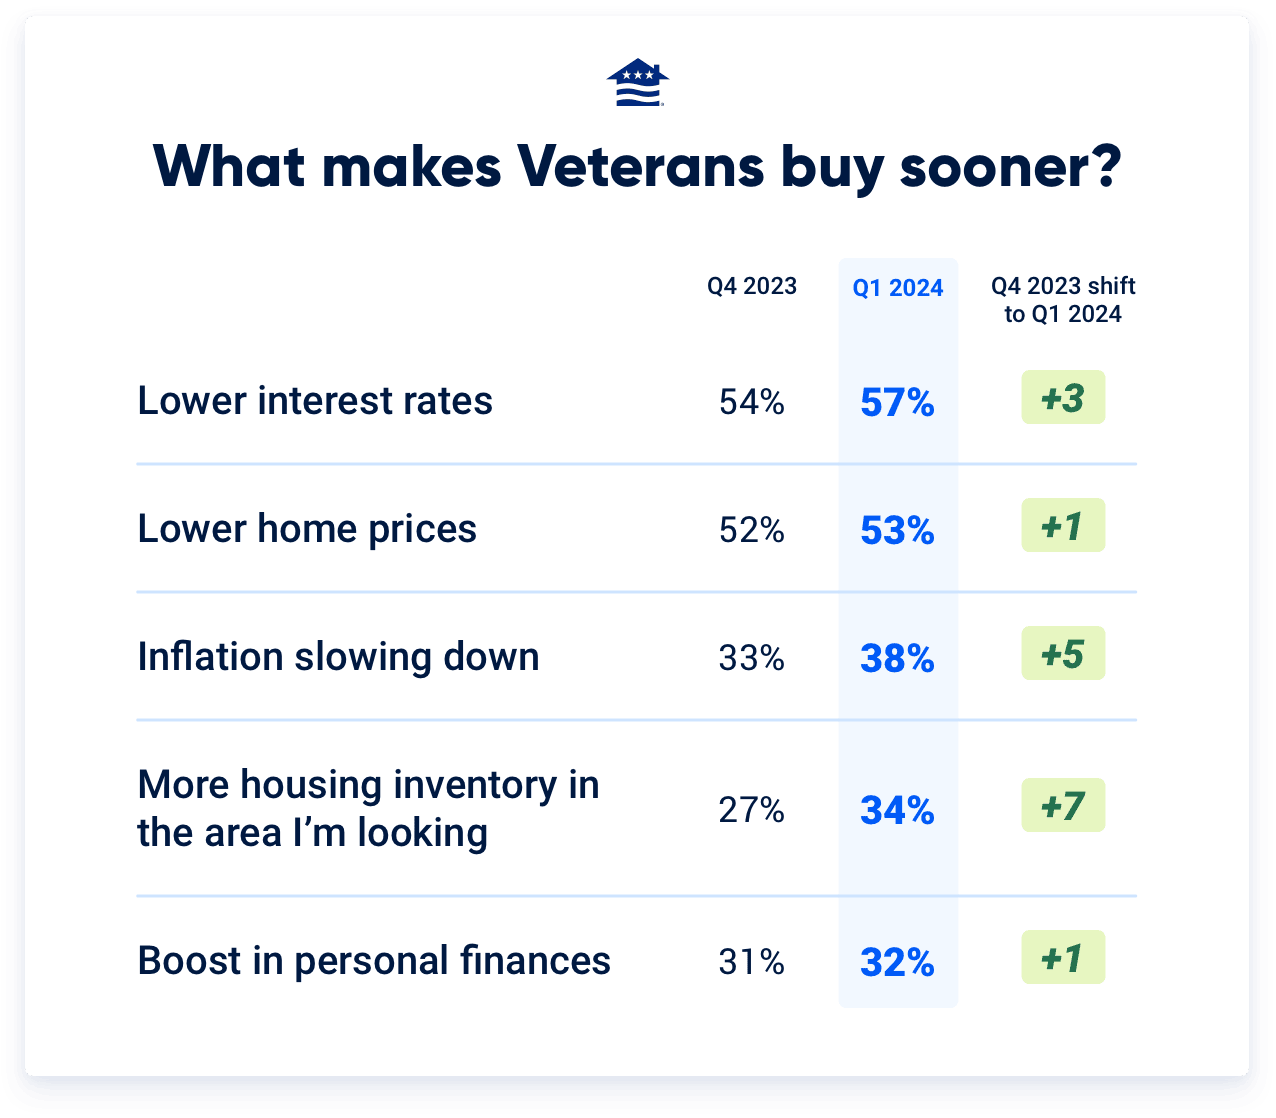 With economic optimism on the rise, an increasing number of Veterans say a boost in inventory would lead them to buy a home sooner. 